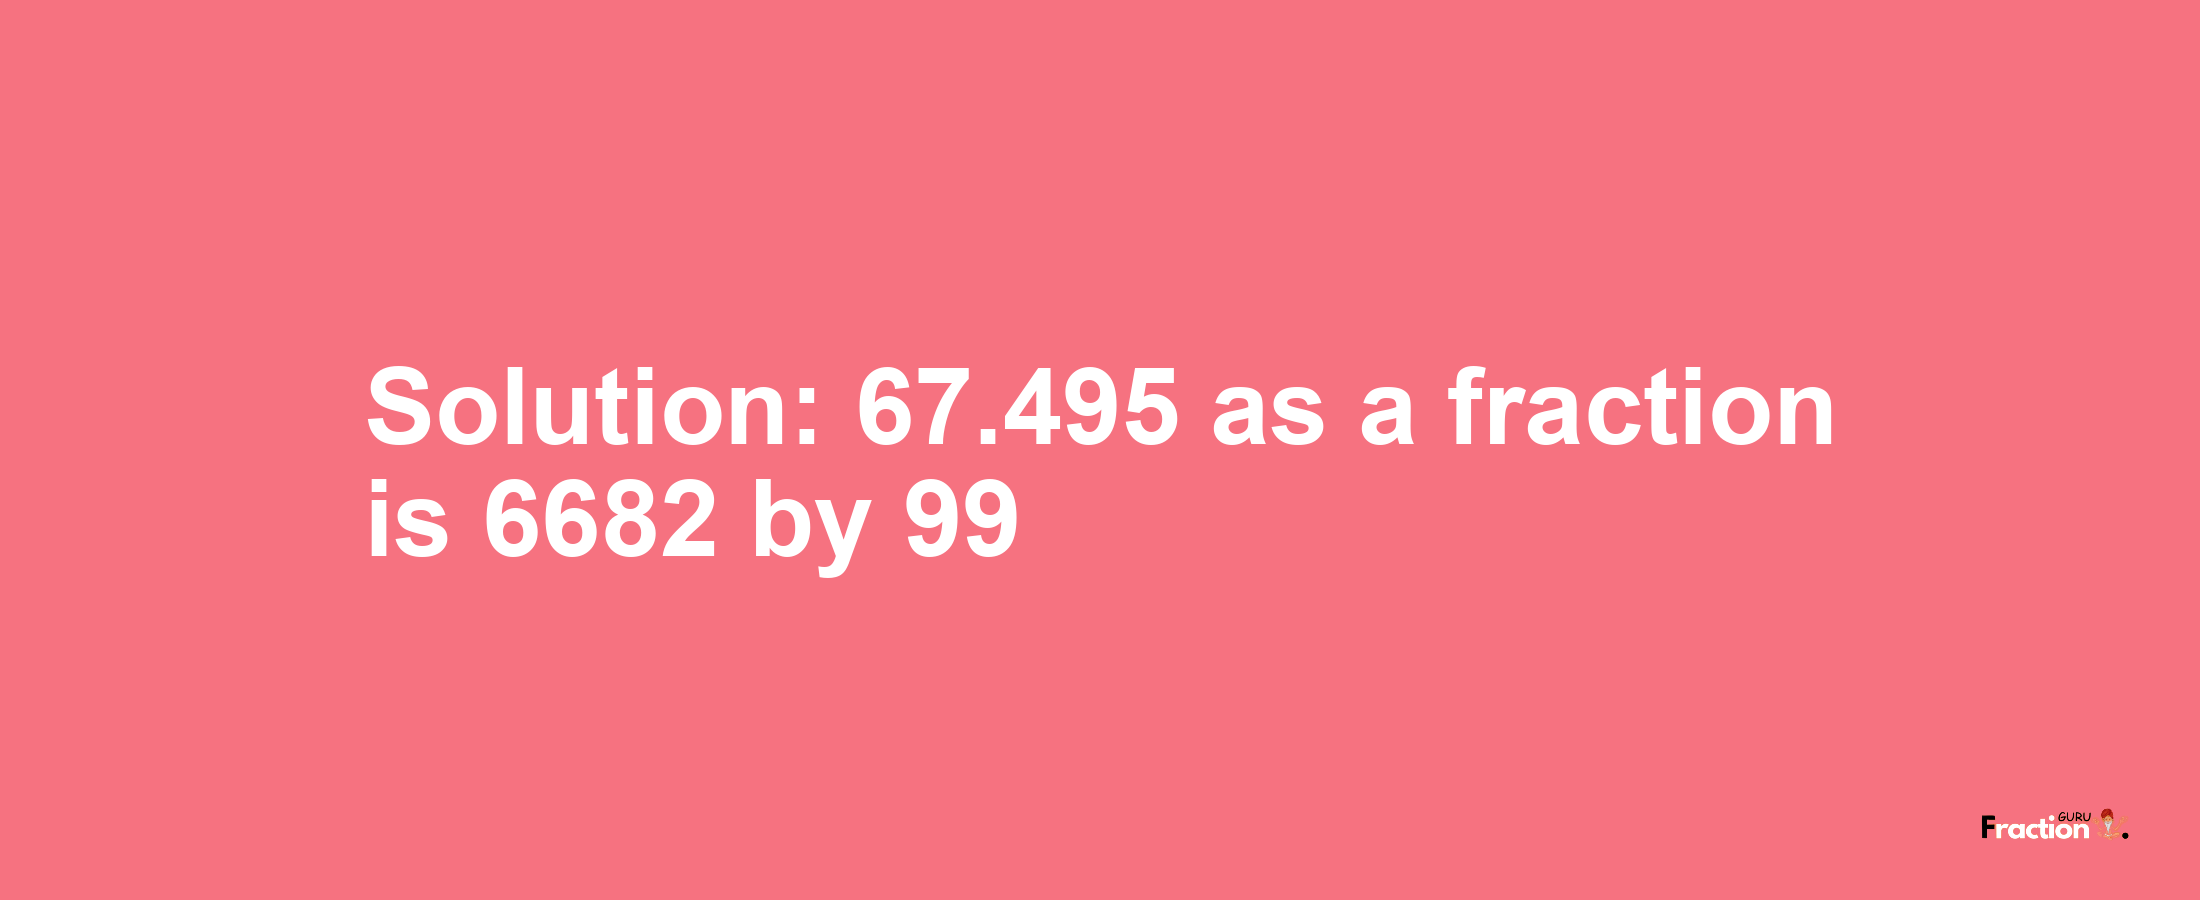 Solution:67.495 as a fraction is 6682/99